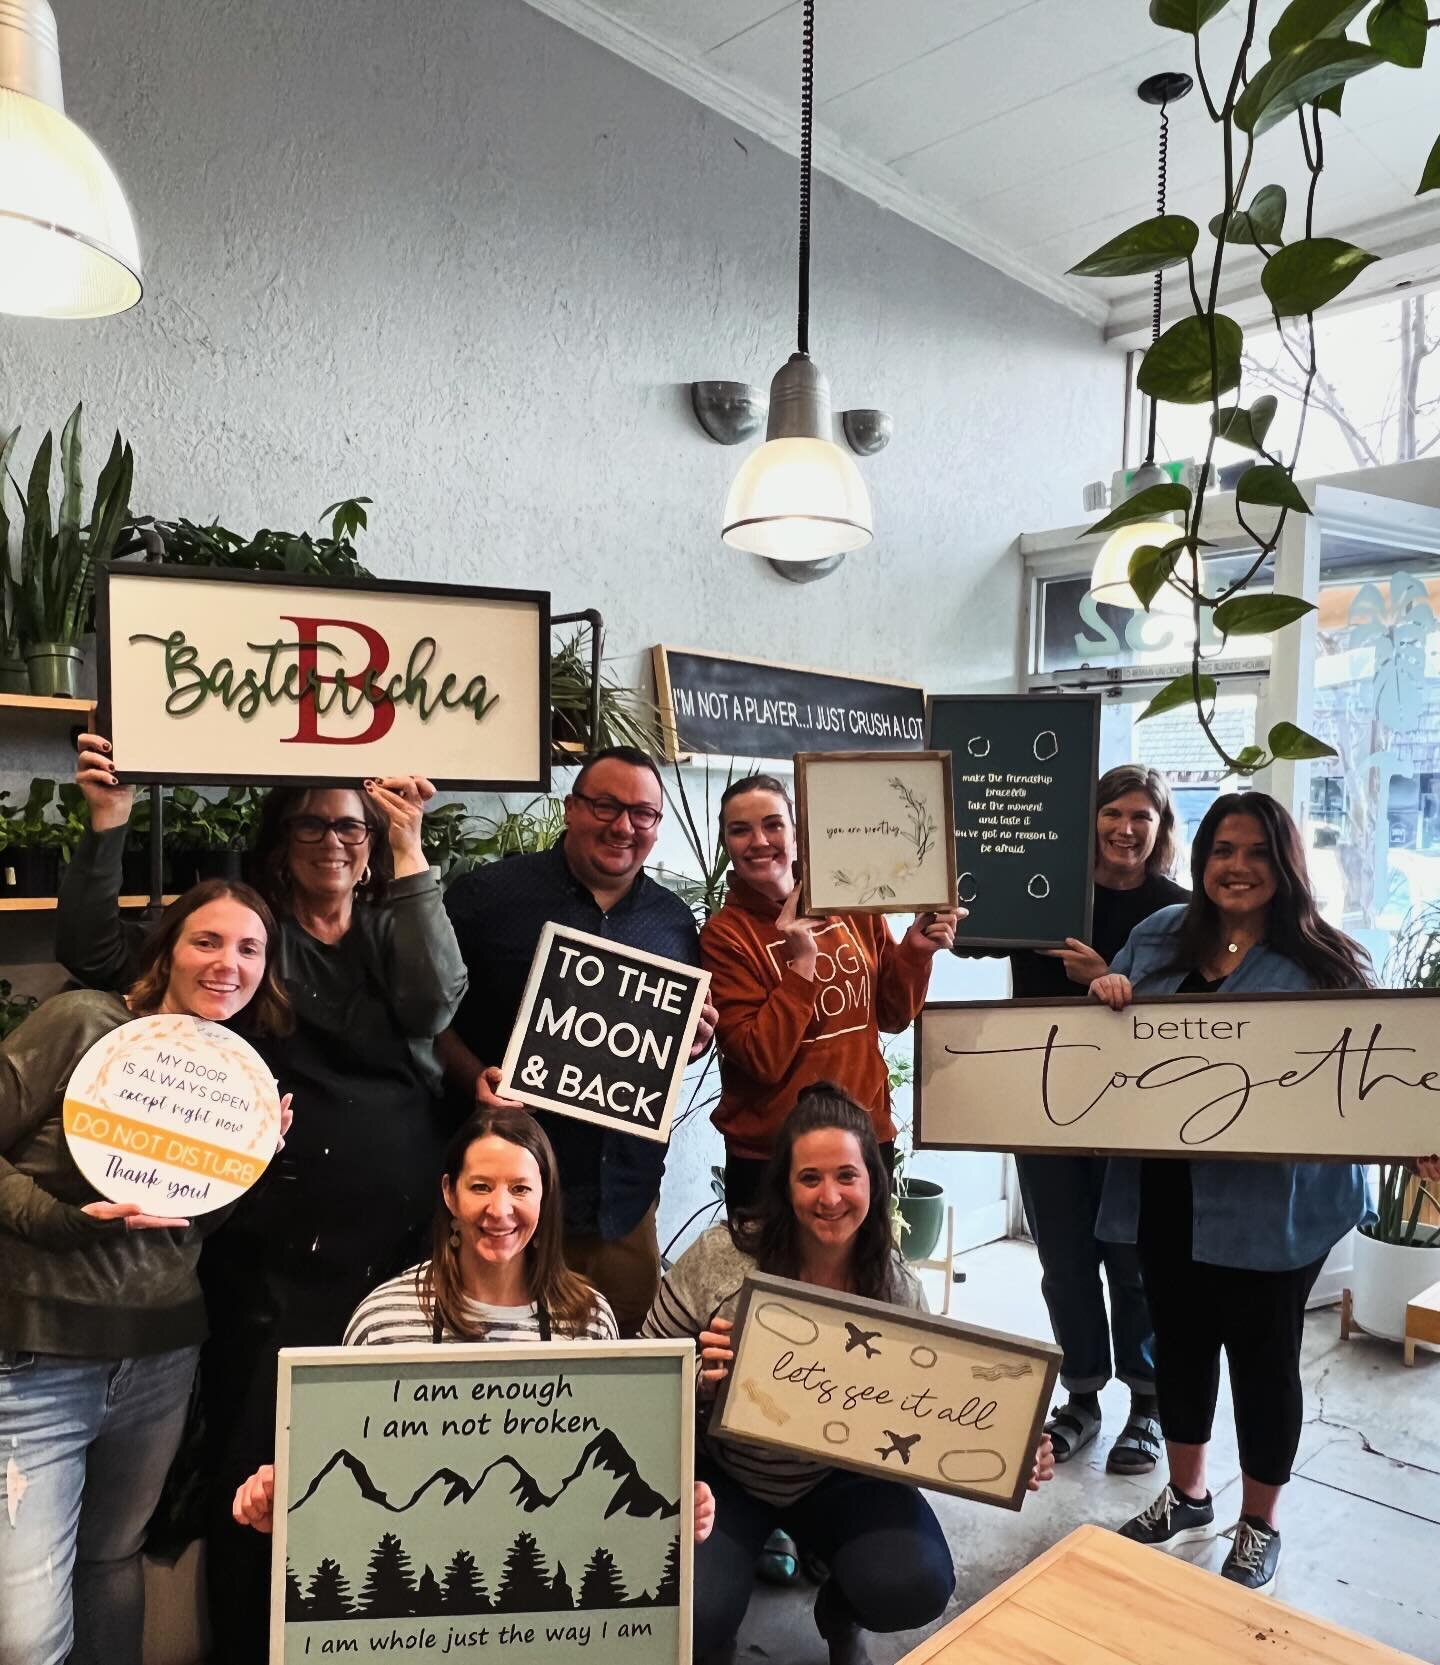 Such a fun and creative group this afternoon! There was some paint splatter art, lots of colors and even friendship bracelets made to put on a sign, they all turned out so freaking cute! Thanks for painting with me today! 

#downtownmeridianidaho #me